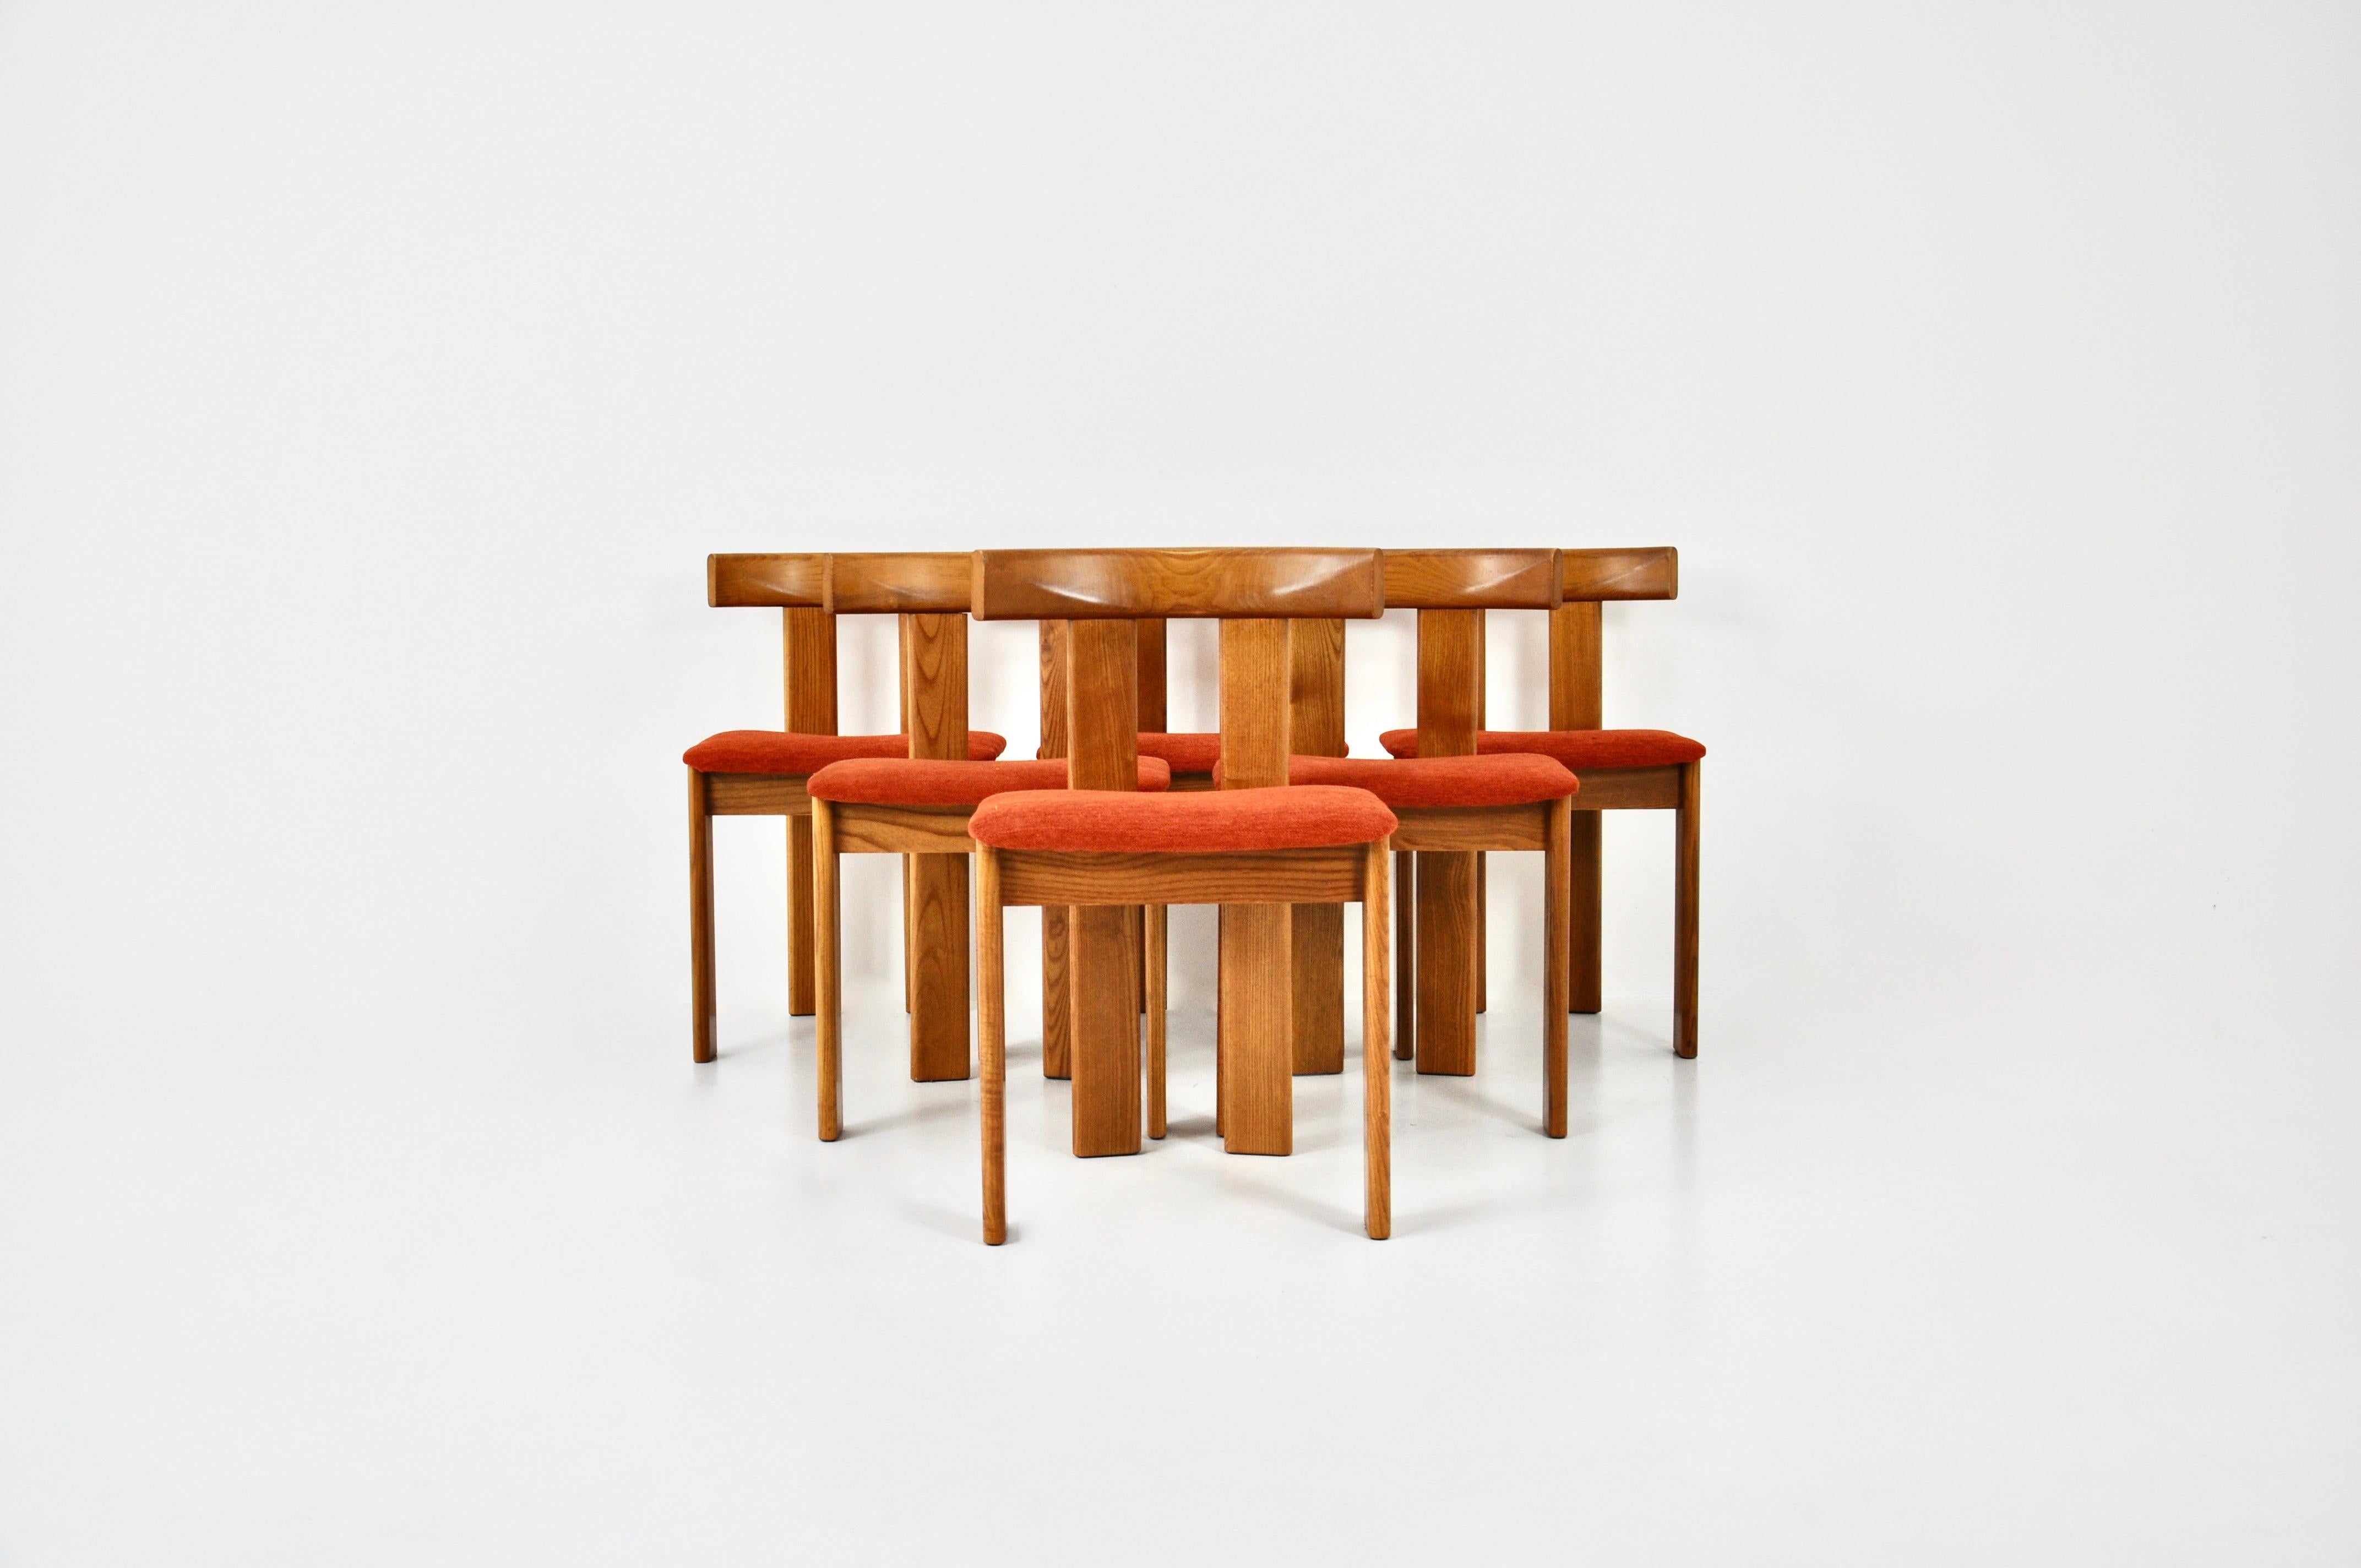 Set of 6 wooden chairs with red-orange fabric seats by Luigi Vaghi. Seat height: 45 cm. Wear due to age and age of chairs.